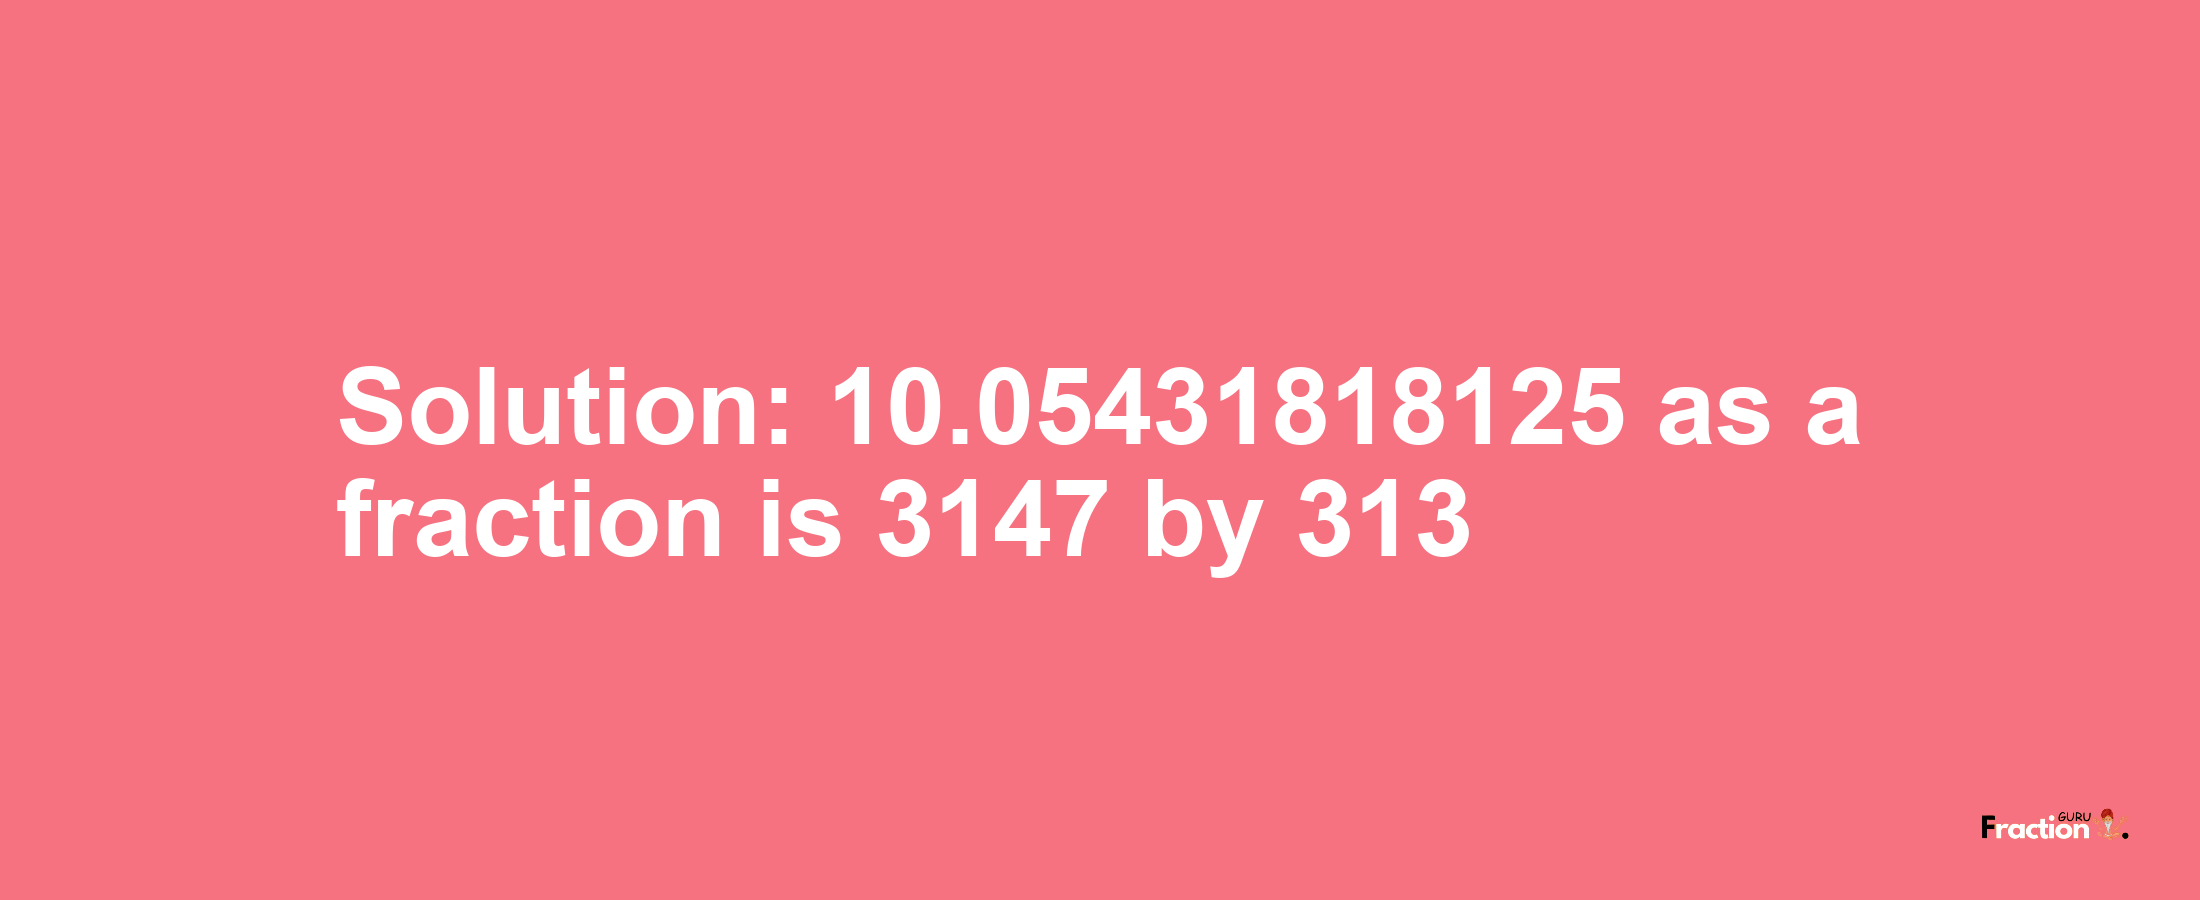 Solution:10.05431818125 as a fraction is 3147/313